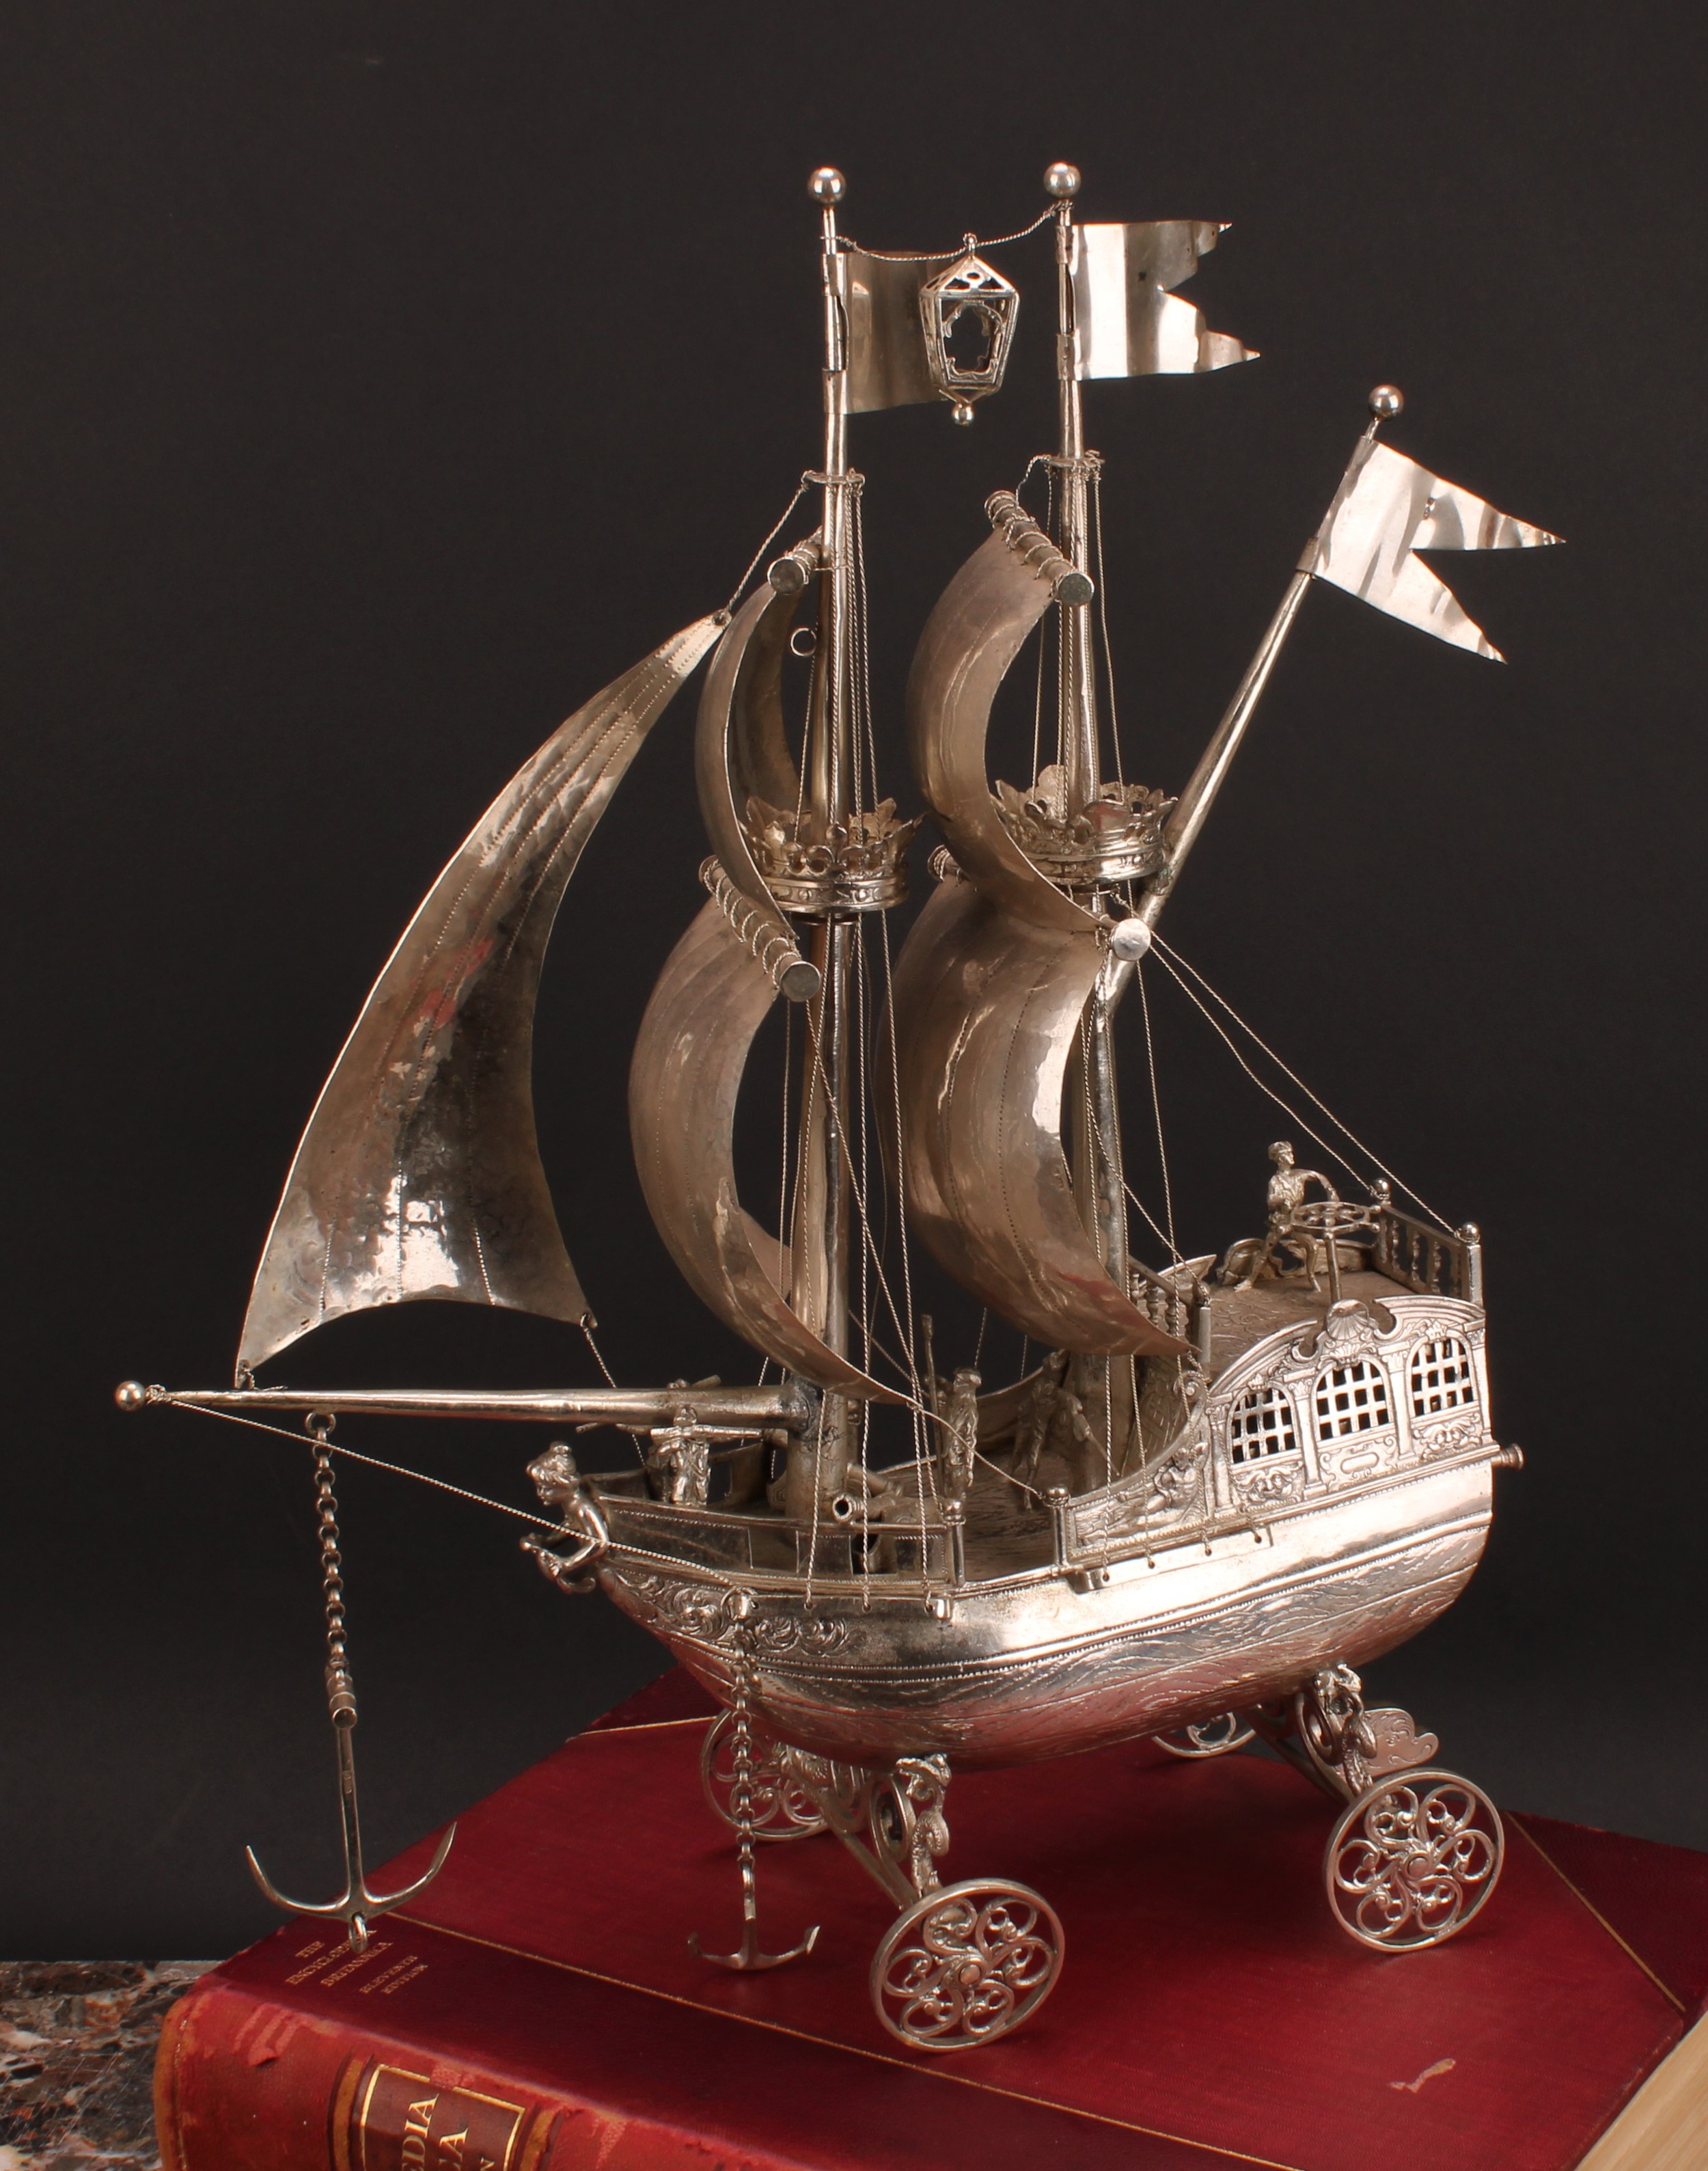 A Dutch silver nef, typically cast and wrought as a two-masted sailing ship, with billowing sails